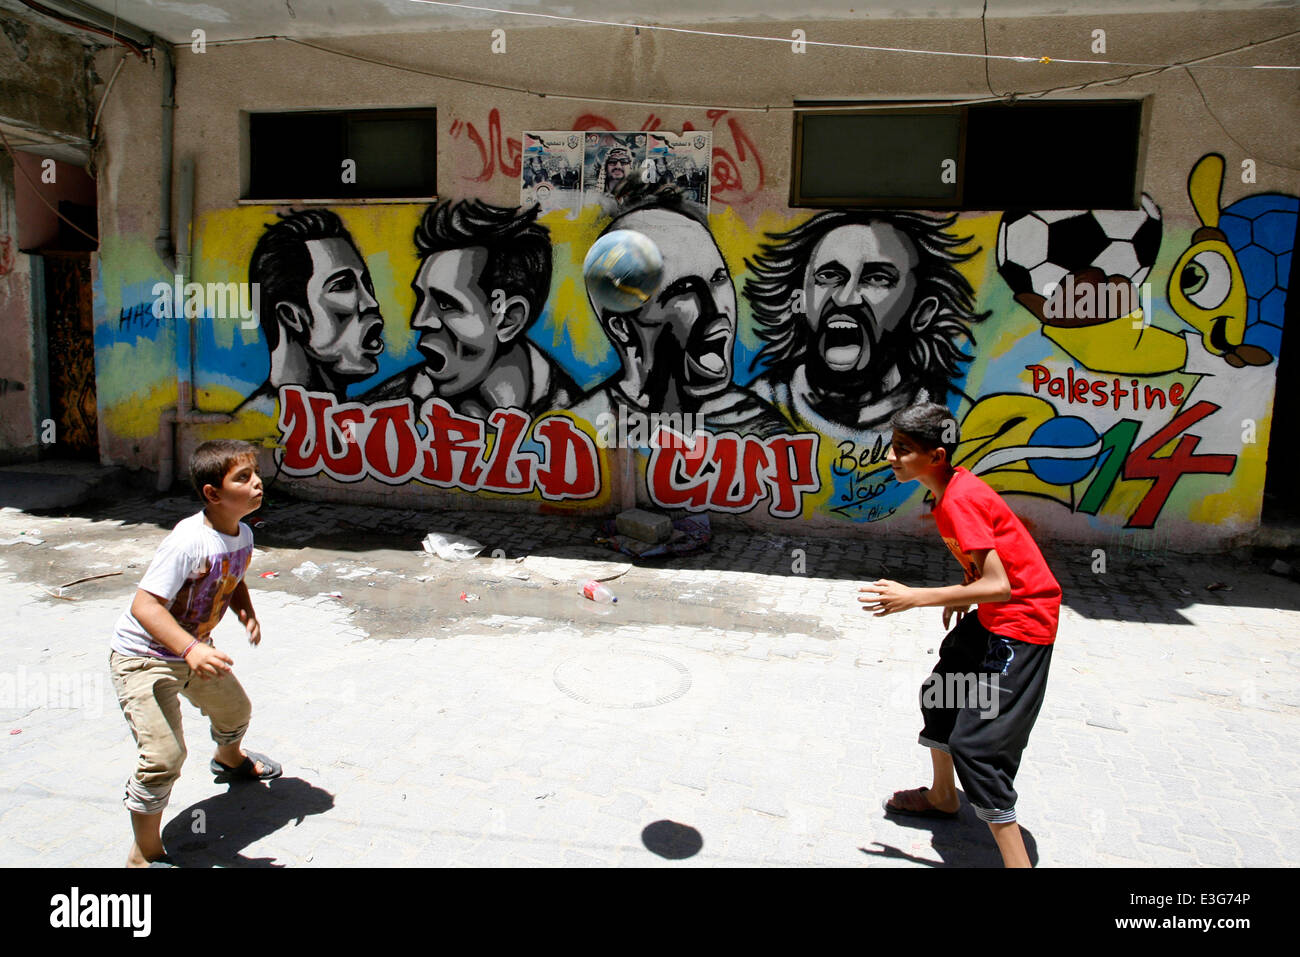 KHAN YUNIS, GAZA STRIP, PALESTINE - JUNE 23: A Palestinian boys play a ball in front of graffiti wall murals depicting football players the participants at 2014 World Cup Brazil (LtoR) Portugal's Cristiano Ronaldo, Argentina's Lionel Messi, Netherlands' Arjen Robben and Italy's Andrea Pirlo, in the Khan Yunis refugee camp in the southern Gaza Strip on June 23, 2014. (Photo by Abed Rahim Khatib /Pacific Press) Stock Photo